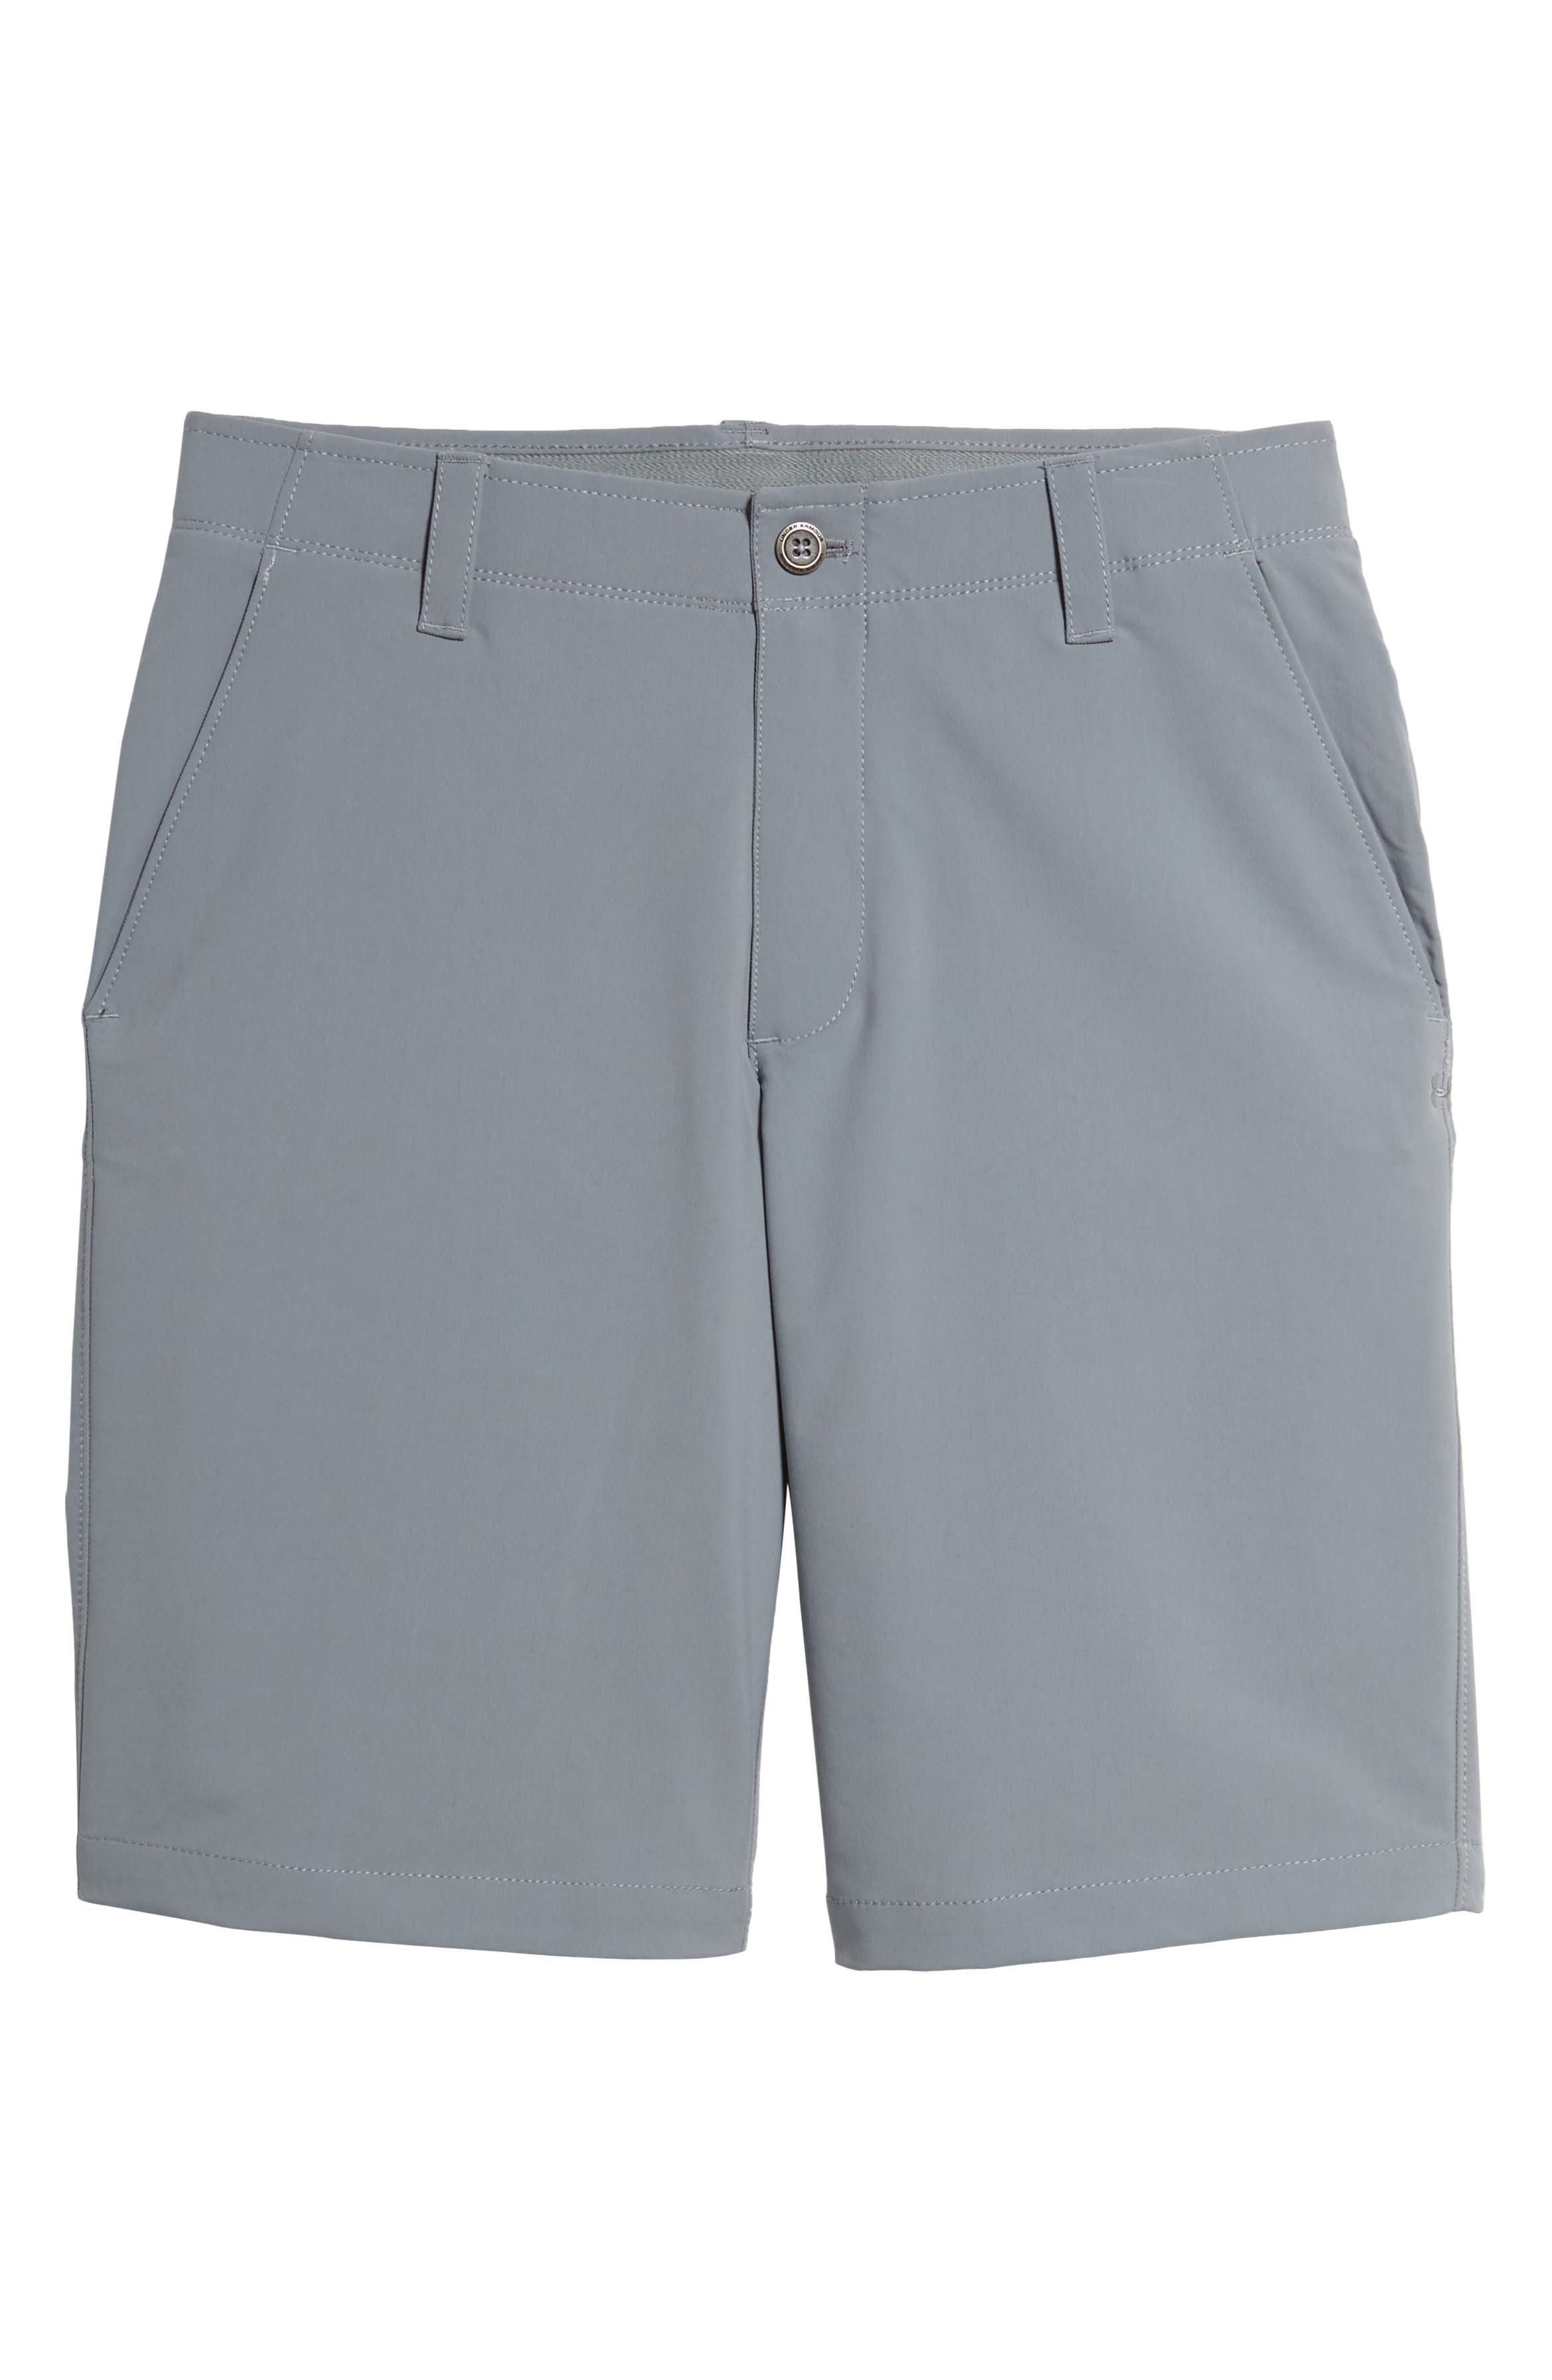 Under Armour 'Matchplay' Moisture Wicking Golf Shorts | Nordstrom